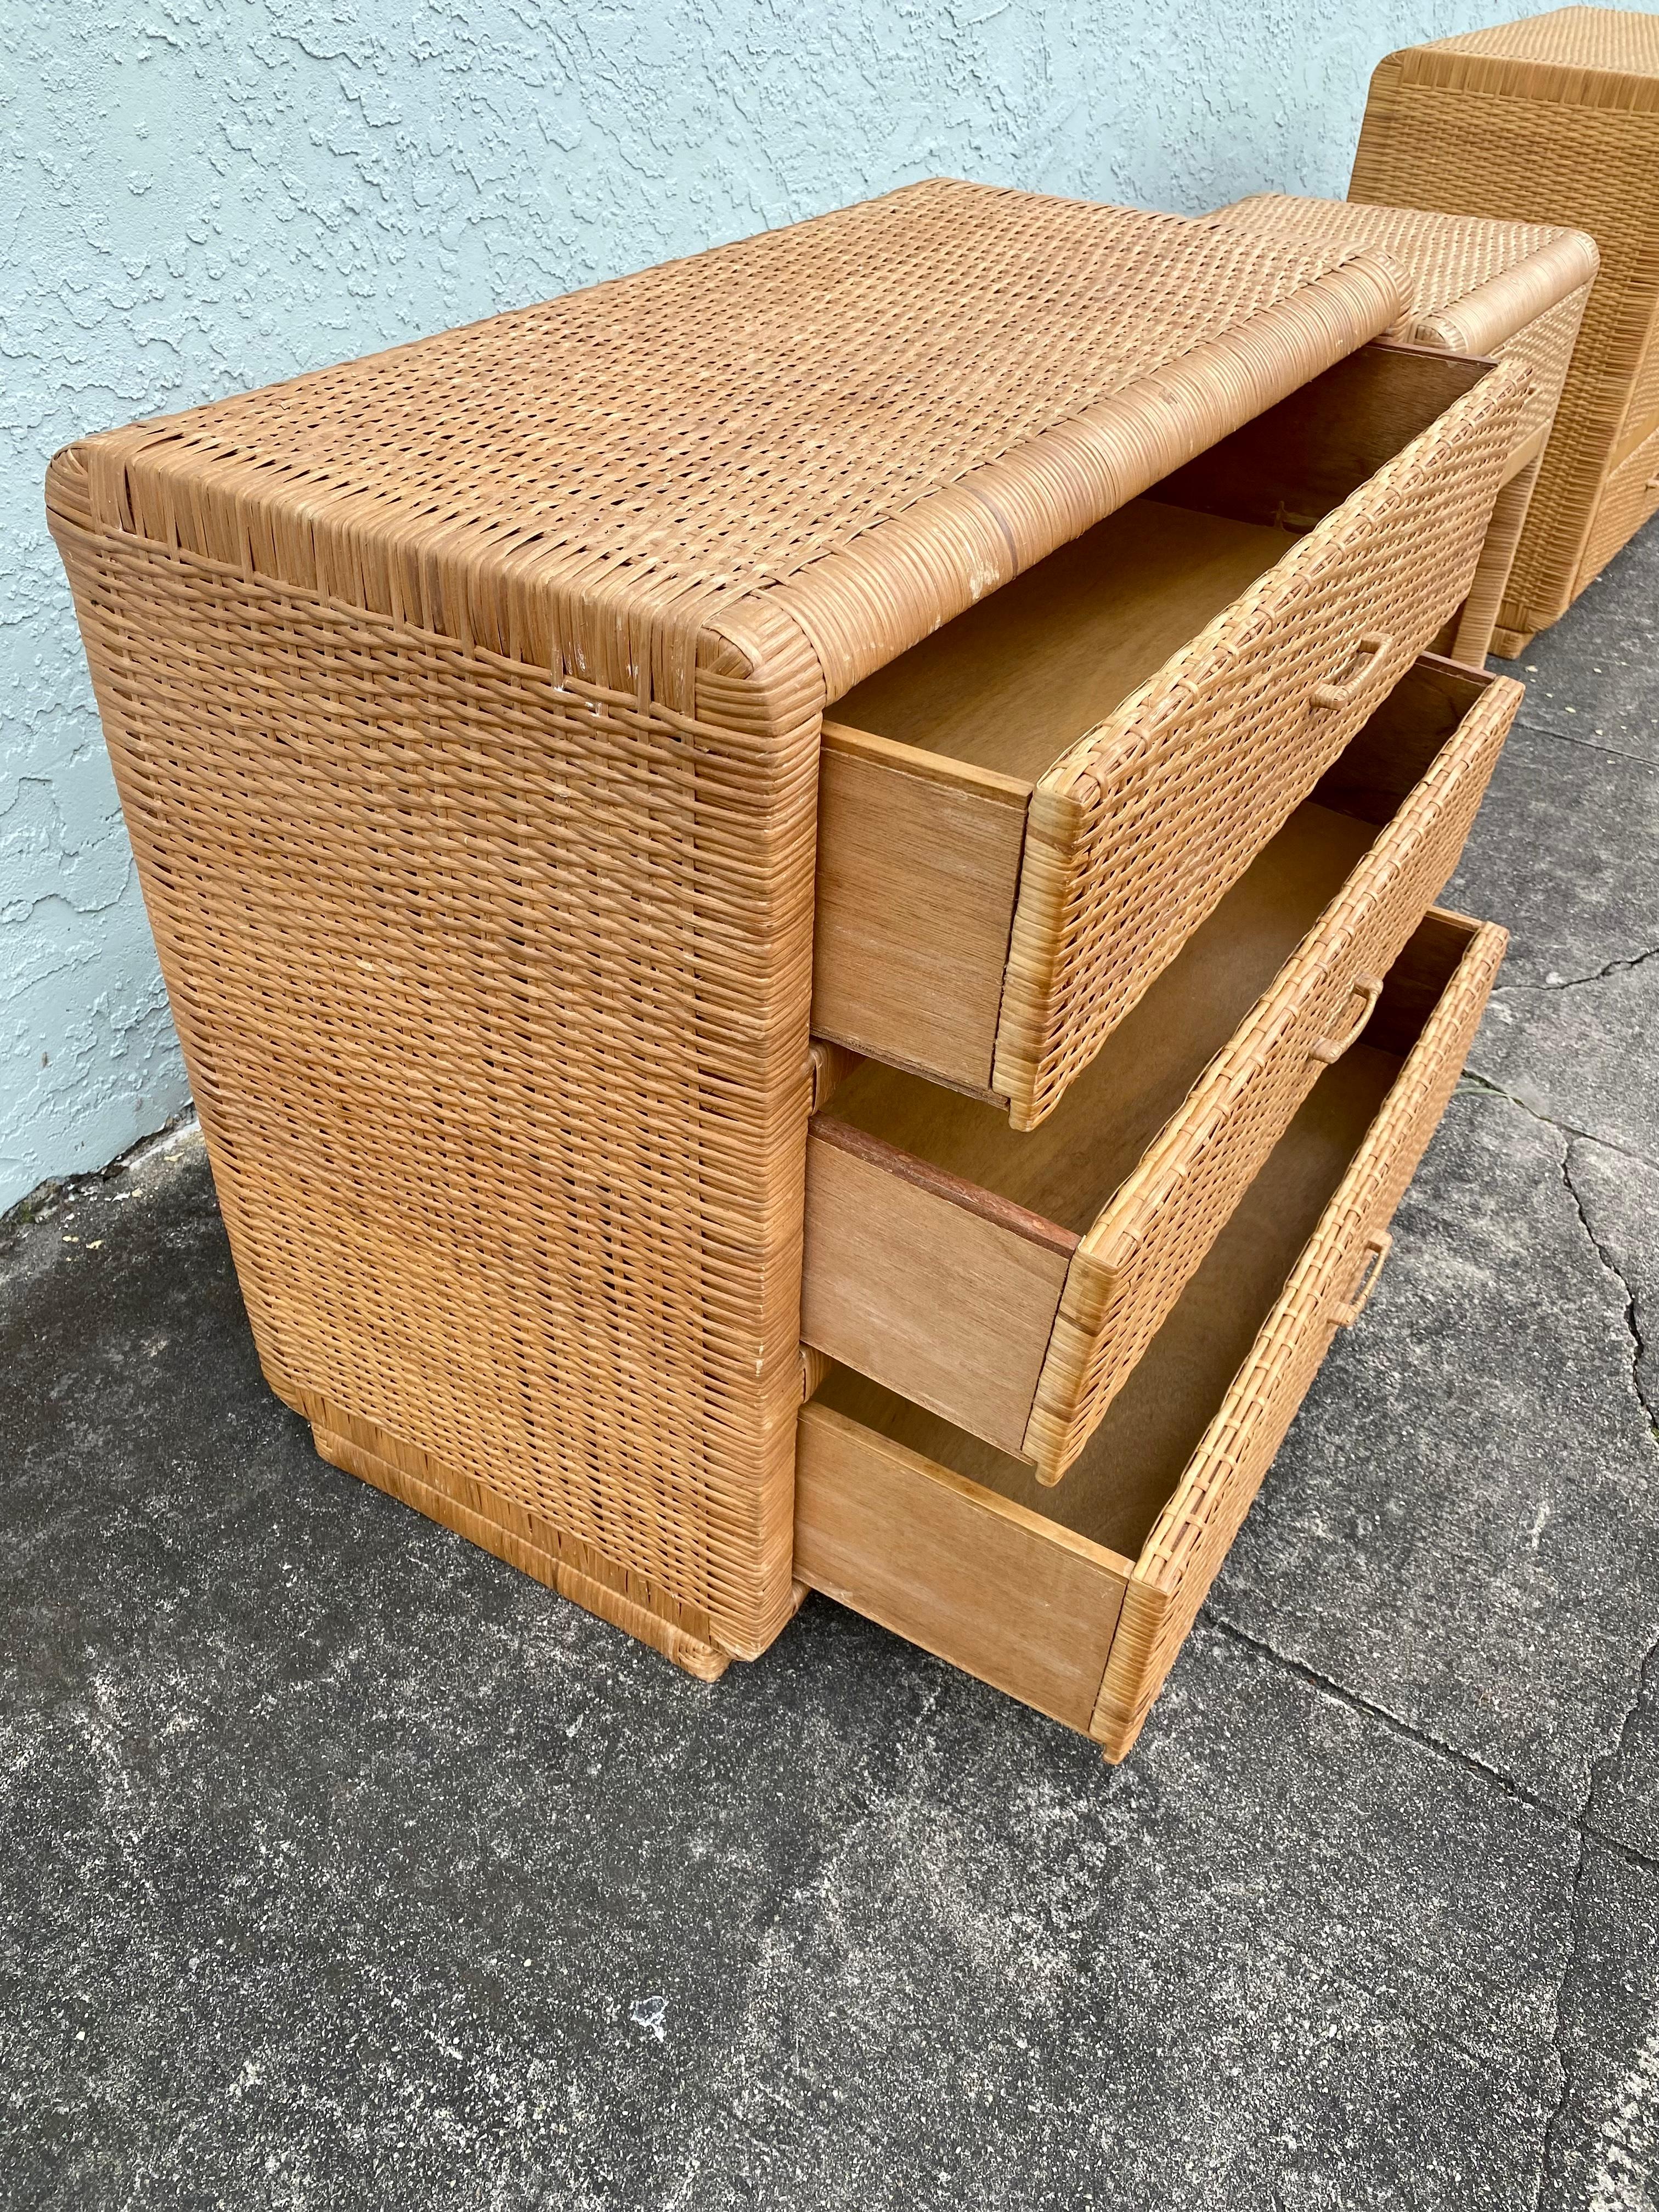 1970s Rattan Wicker Waterfall Chest Dresser Nightstand, Set of 3 In Good Condition For Sale In Fort Lauderdale, FL